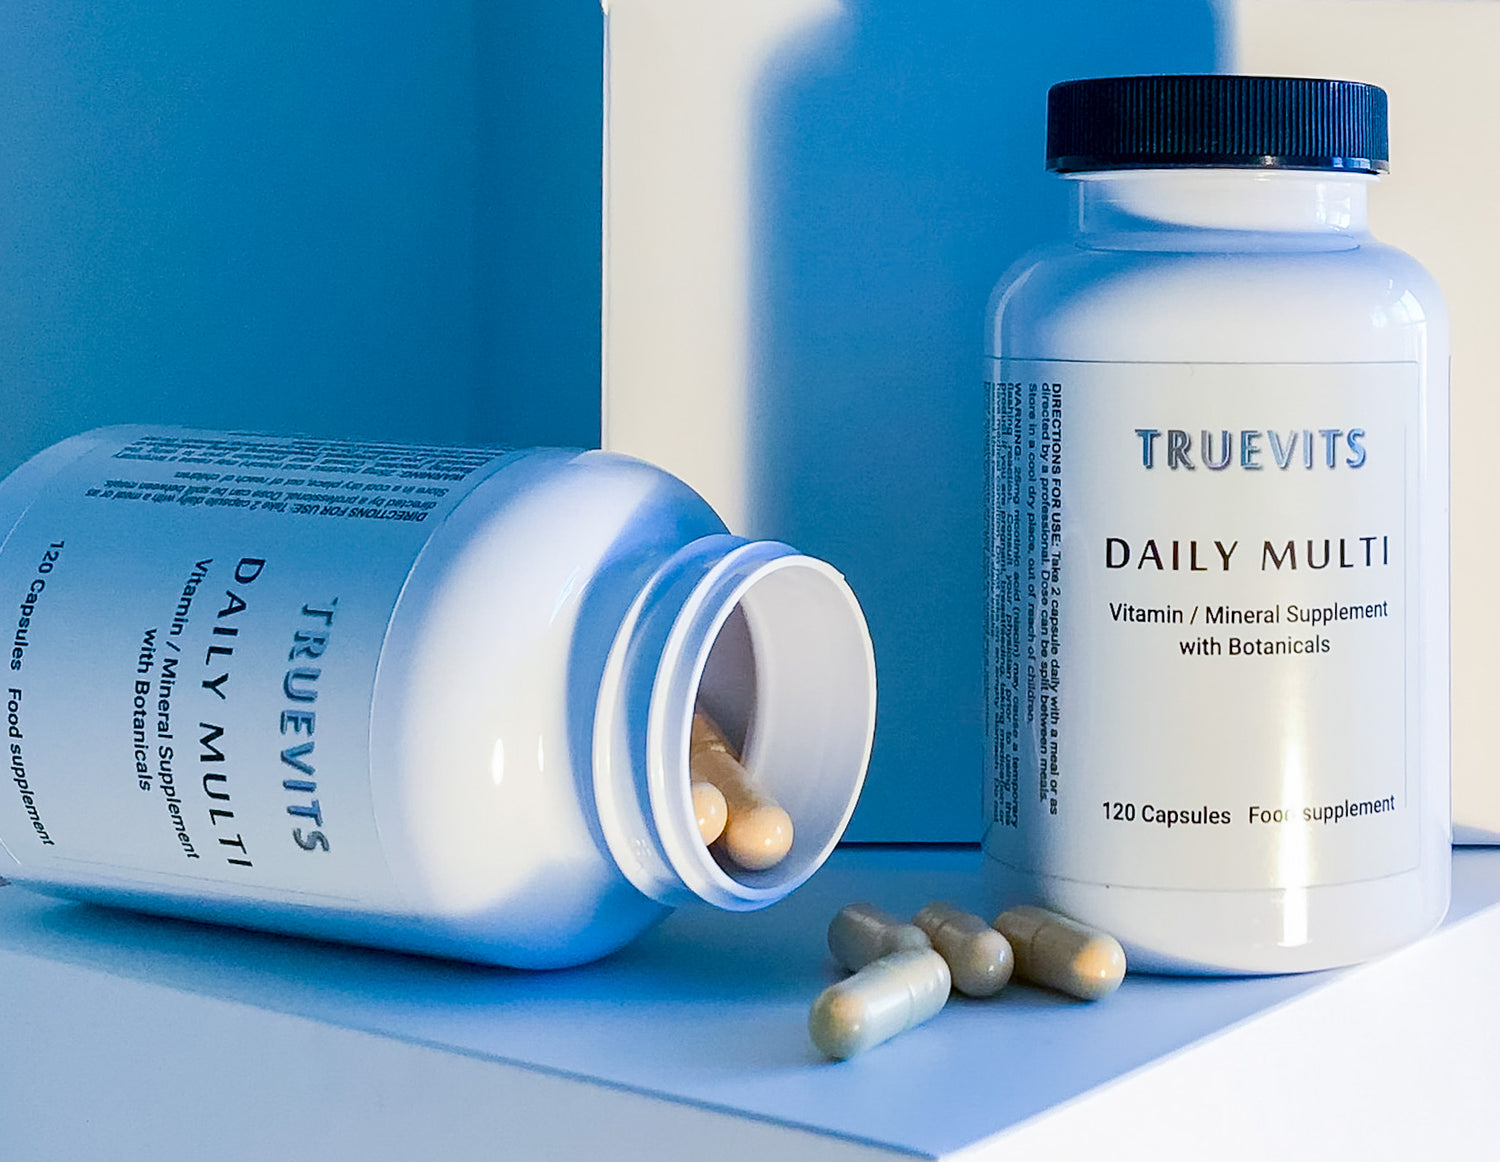 truevits-daily-multi-vitamin-mineral-supplement-capsules-in-white-packaging